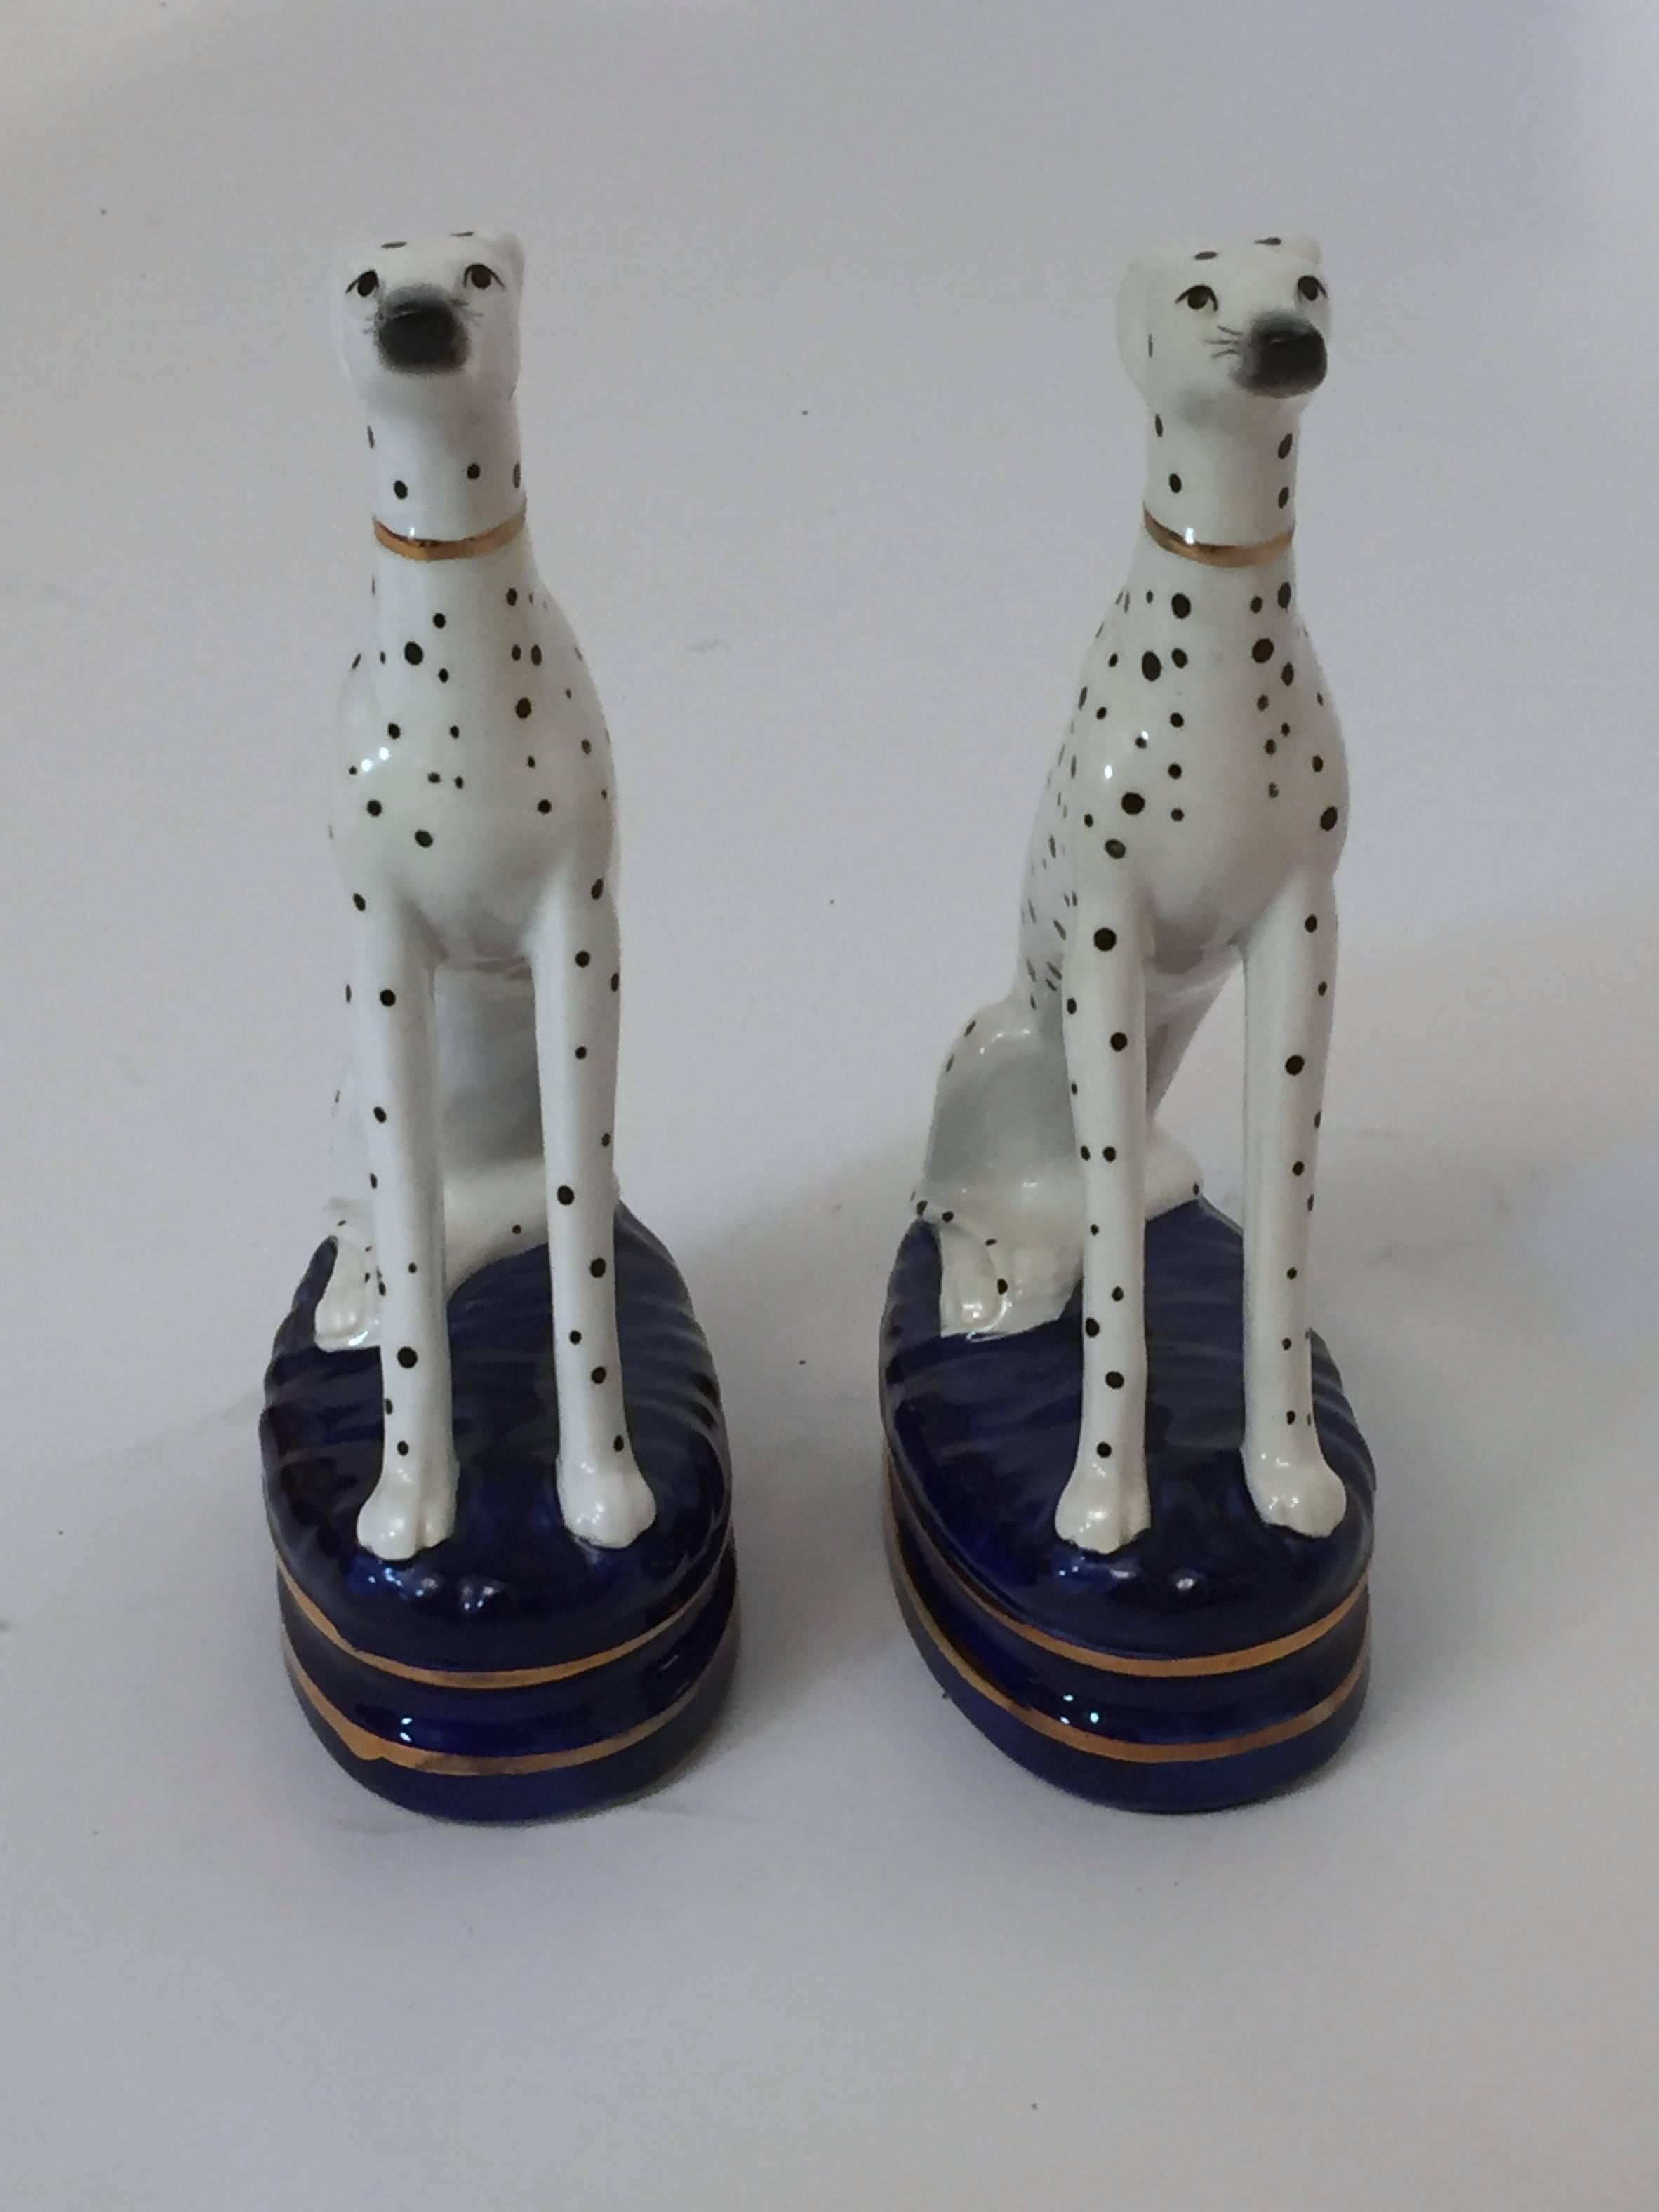 Pair of seated and attentive porcelain Dalmatian figurines for Fitz and Floyd. Hand painted porcelain with cobalt blue bases and gilded accents. Signed FF, Japan with paper label.